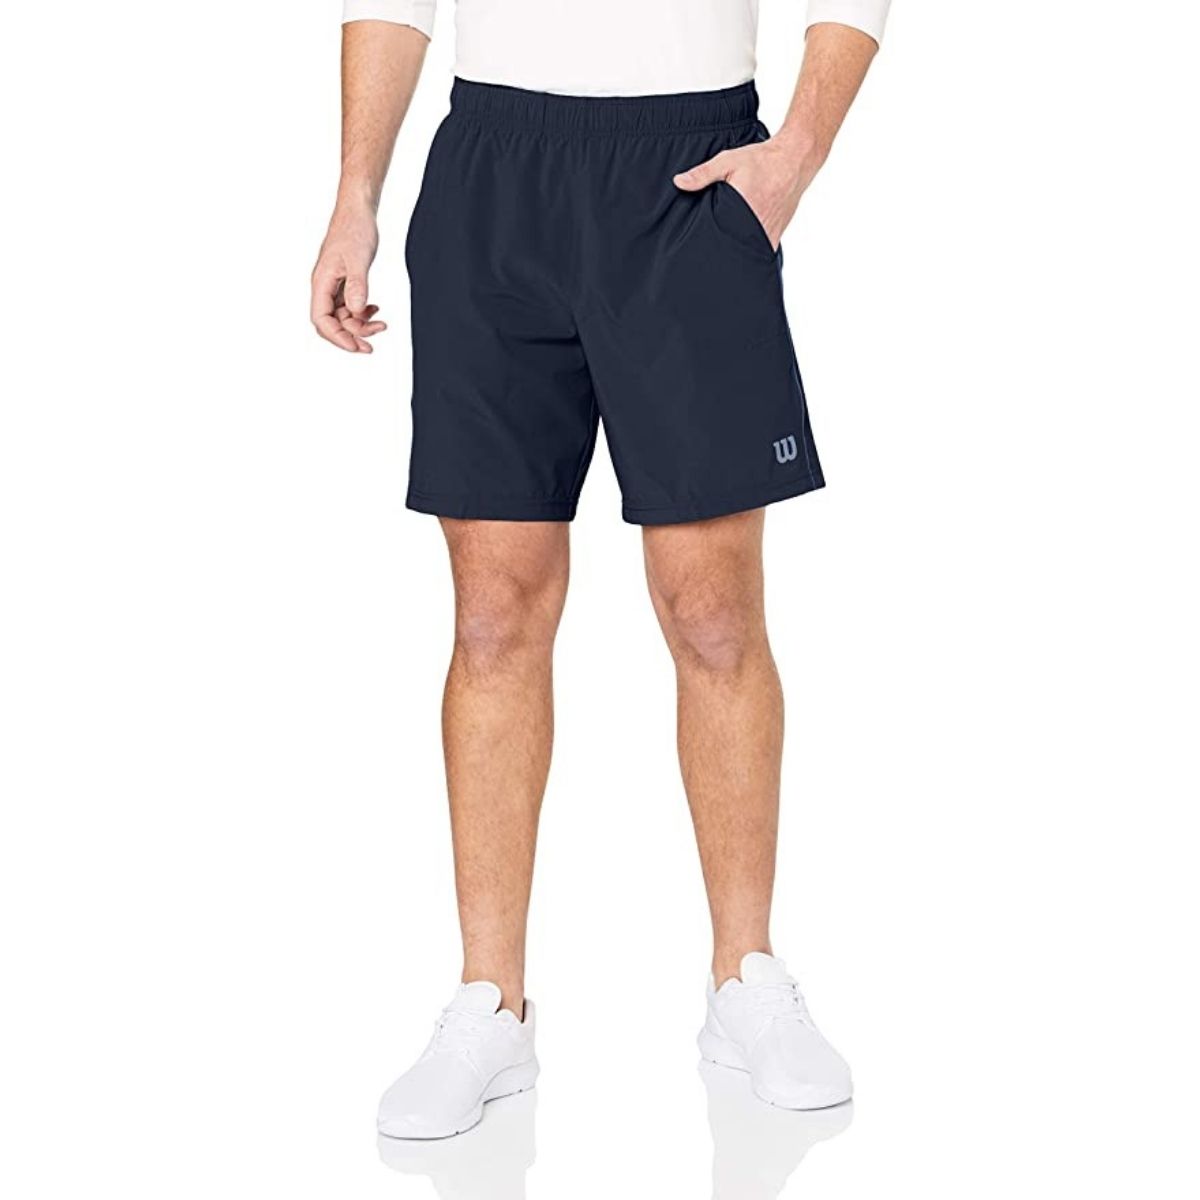 The Best Tennis Shorts Options: WILSON Competition 8in Men's Tennis Shorts